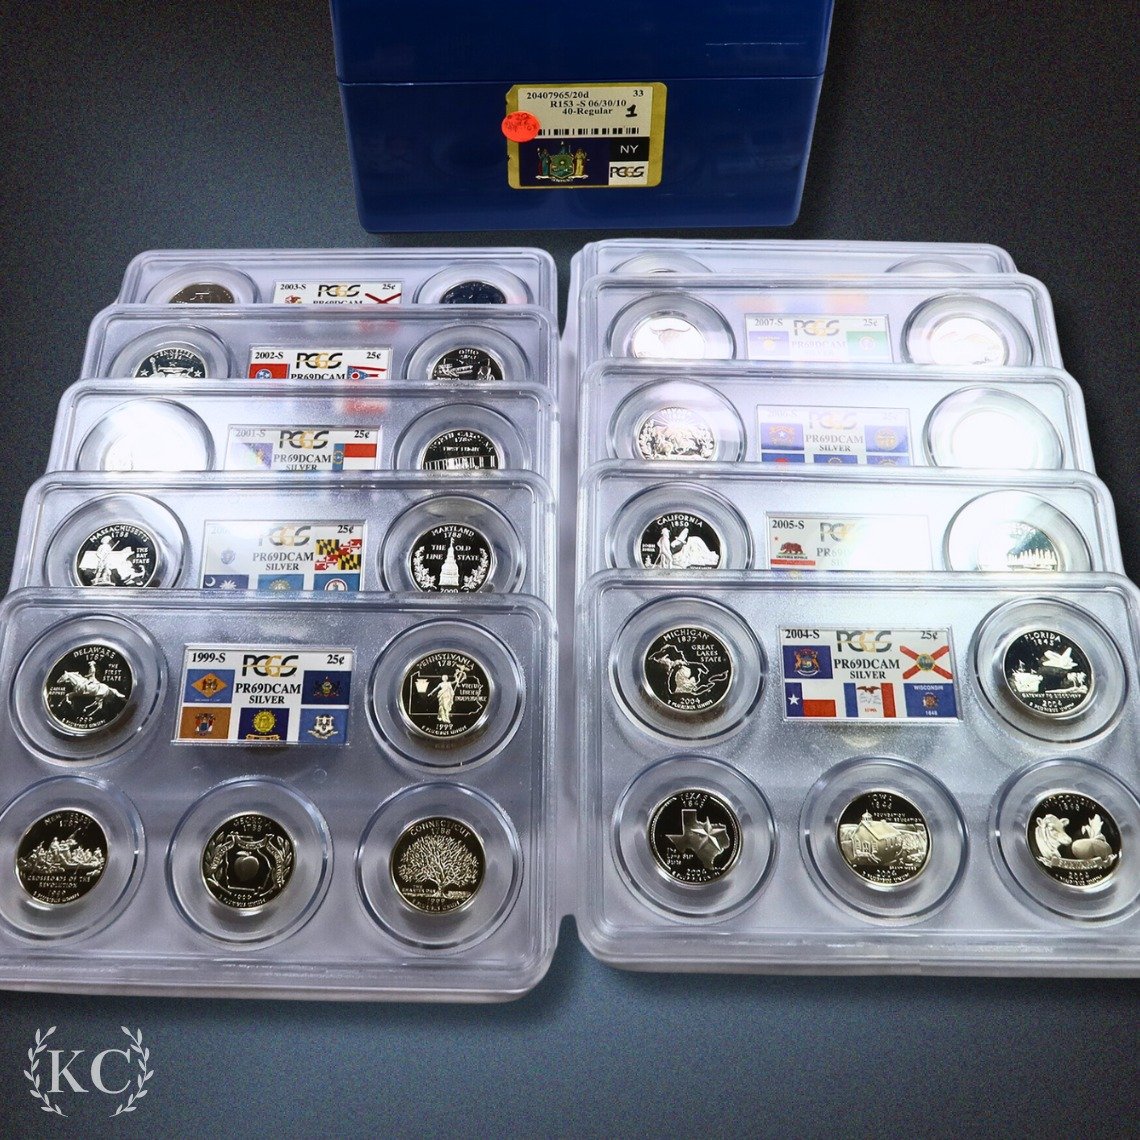 From sea to shining sea, and all it takes is 50 quarters! Add this silver set to your collection today!🇺🇸

#USA #America #Coins #PCGS